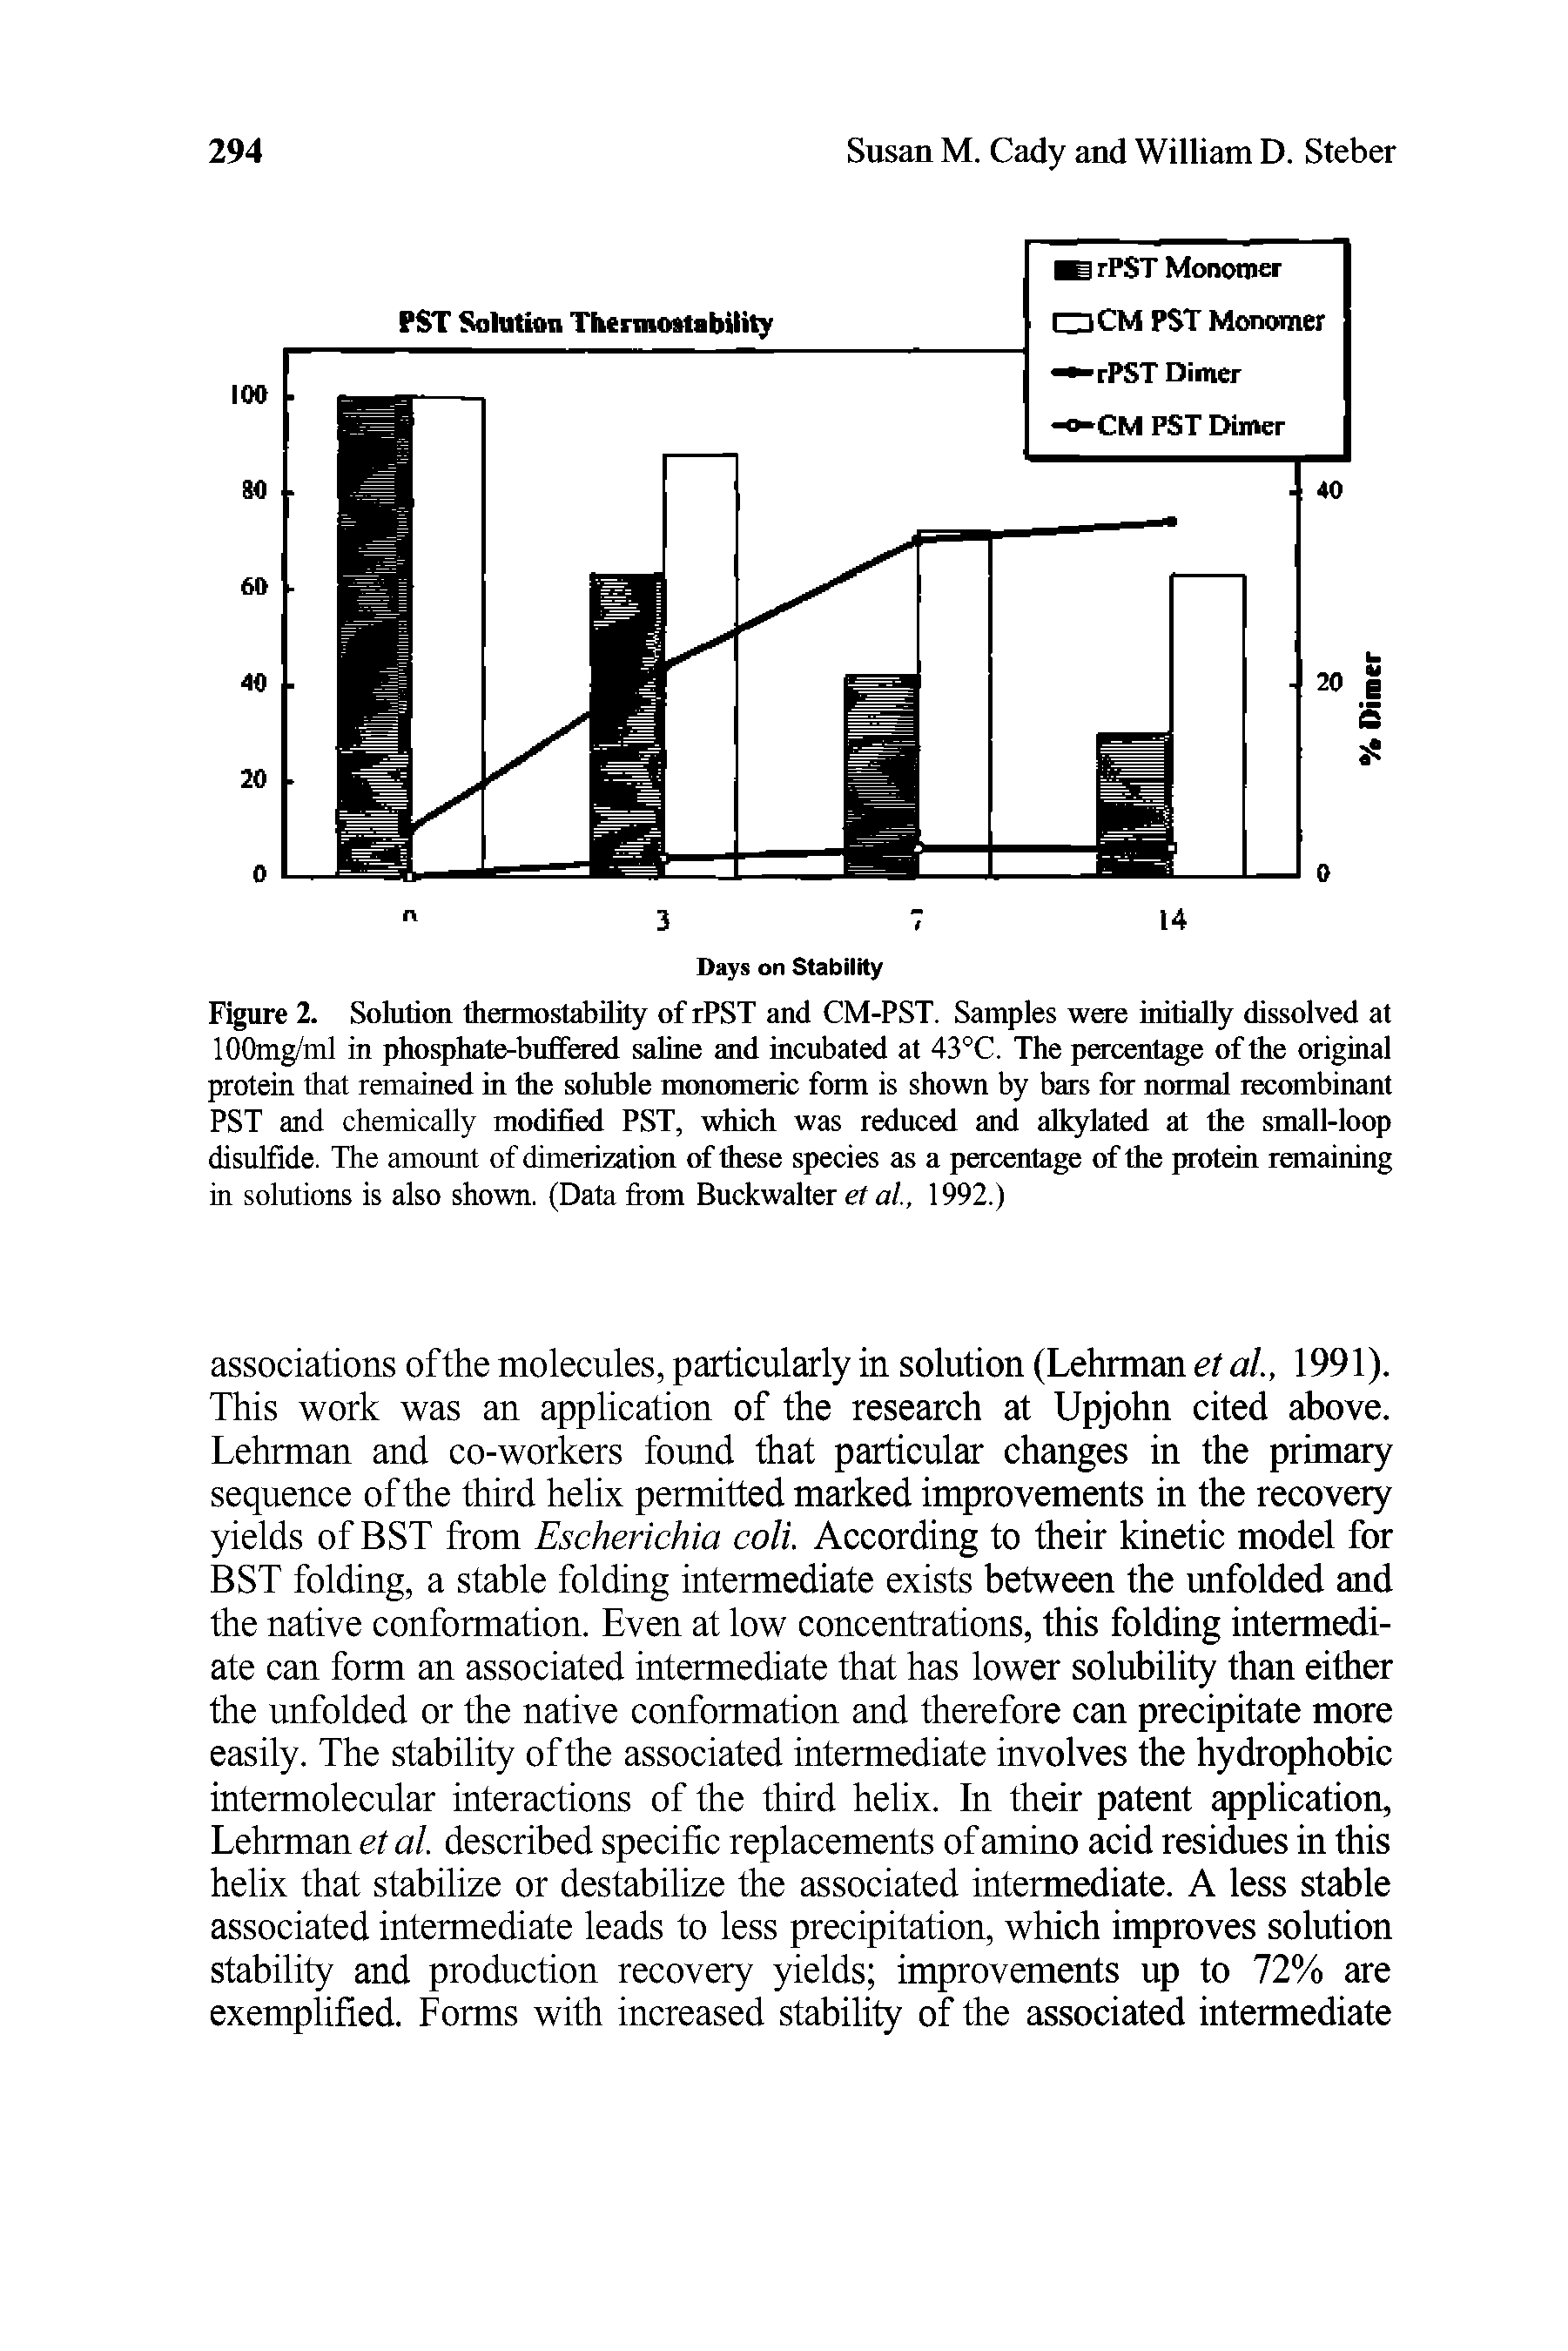 Figure 2. Solution thermostability of rPST and CM-PST. Samples were initially dissolved at lOOmg/ml in phosphate-buffered saline and incubated at 43°C. The percentage of the original protein that remained in the soluble monomeric form is shown by bars for normal recombinant PST and chemically modified PST, which was reduced and alkylated at the small-loop disulfide. The amount of dimerization of these species as a percentage of the protein remaining in solutions is also shown. (Data from Buckwalter et a ., 1992.)...